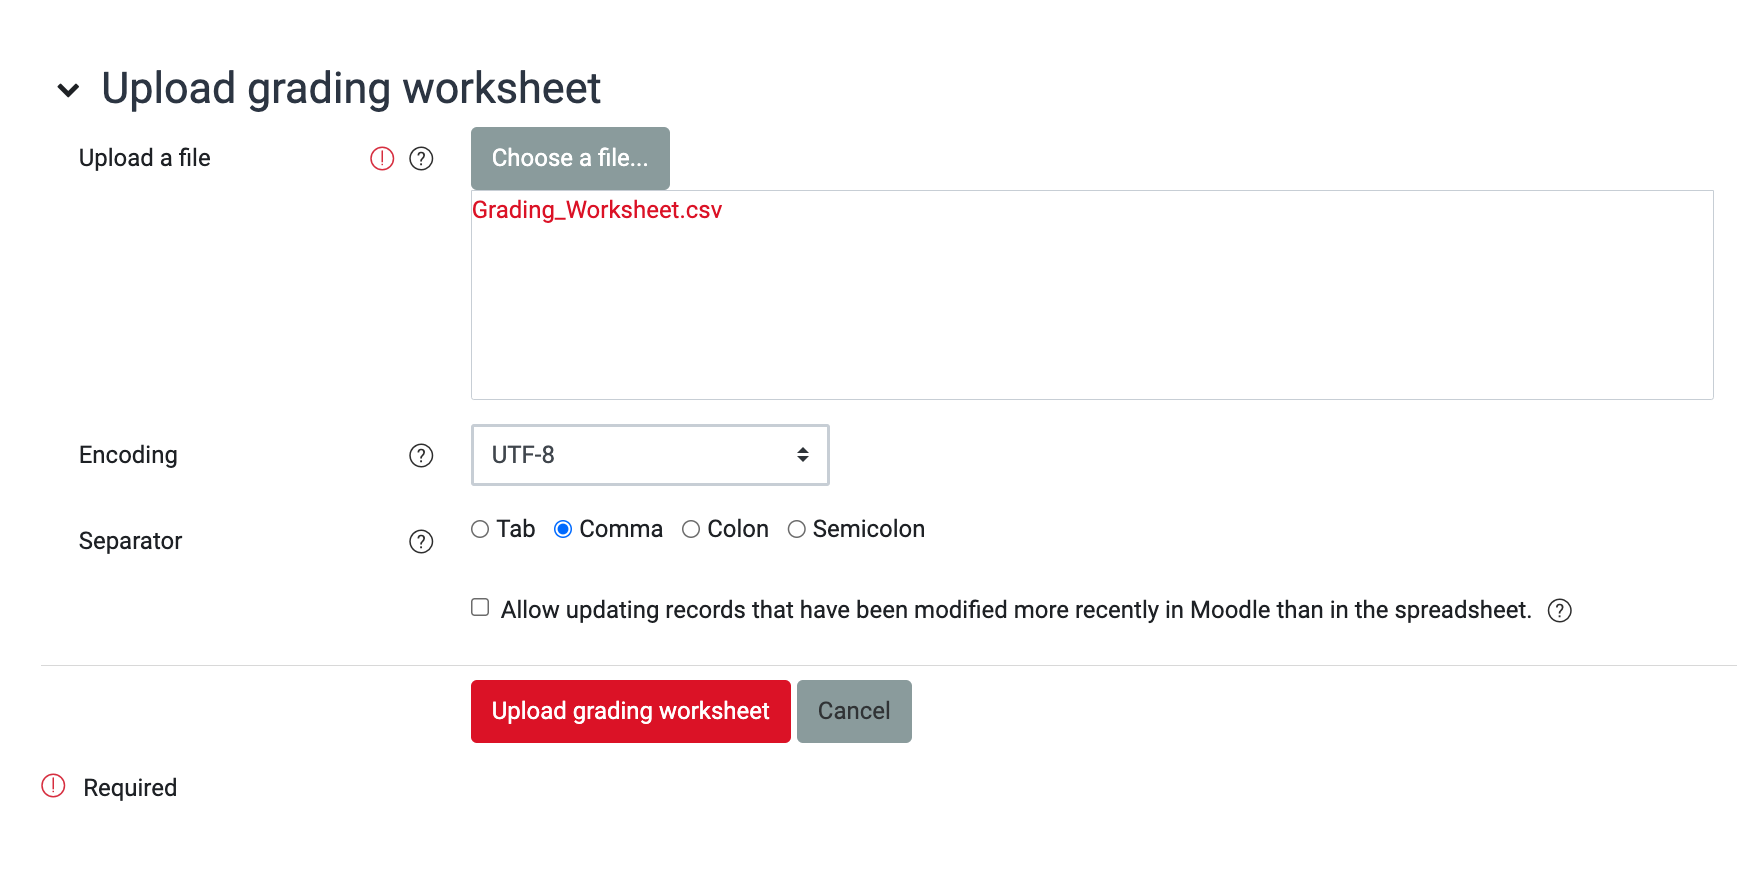 Screenshot of the 'Upload grading worksheet' page of the assignment activity on Moodle. The button 'Choose a file...'  is visible underneath which a file 'grading_worksheet.csv' has been uploaded. A 'Upload grading worksheet' button is visible towards the bottom of the image.